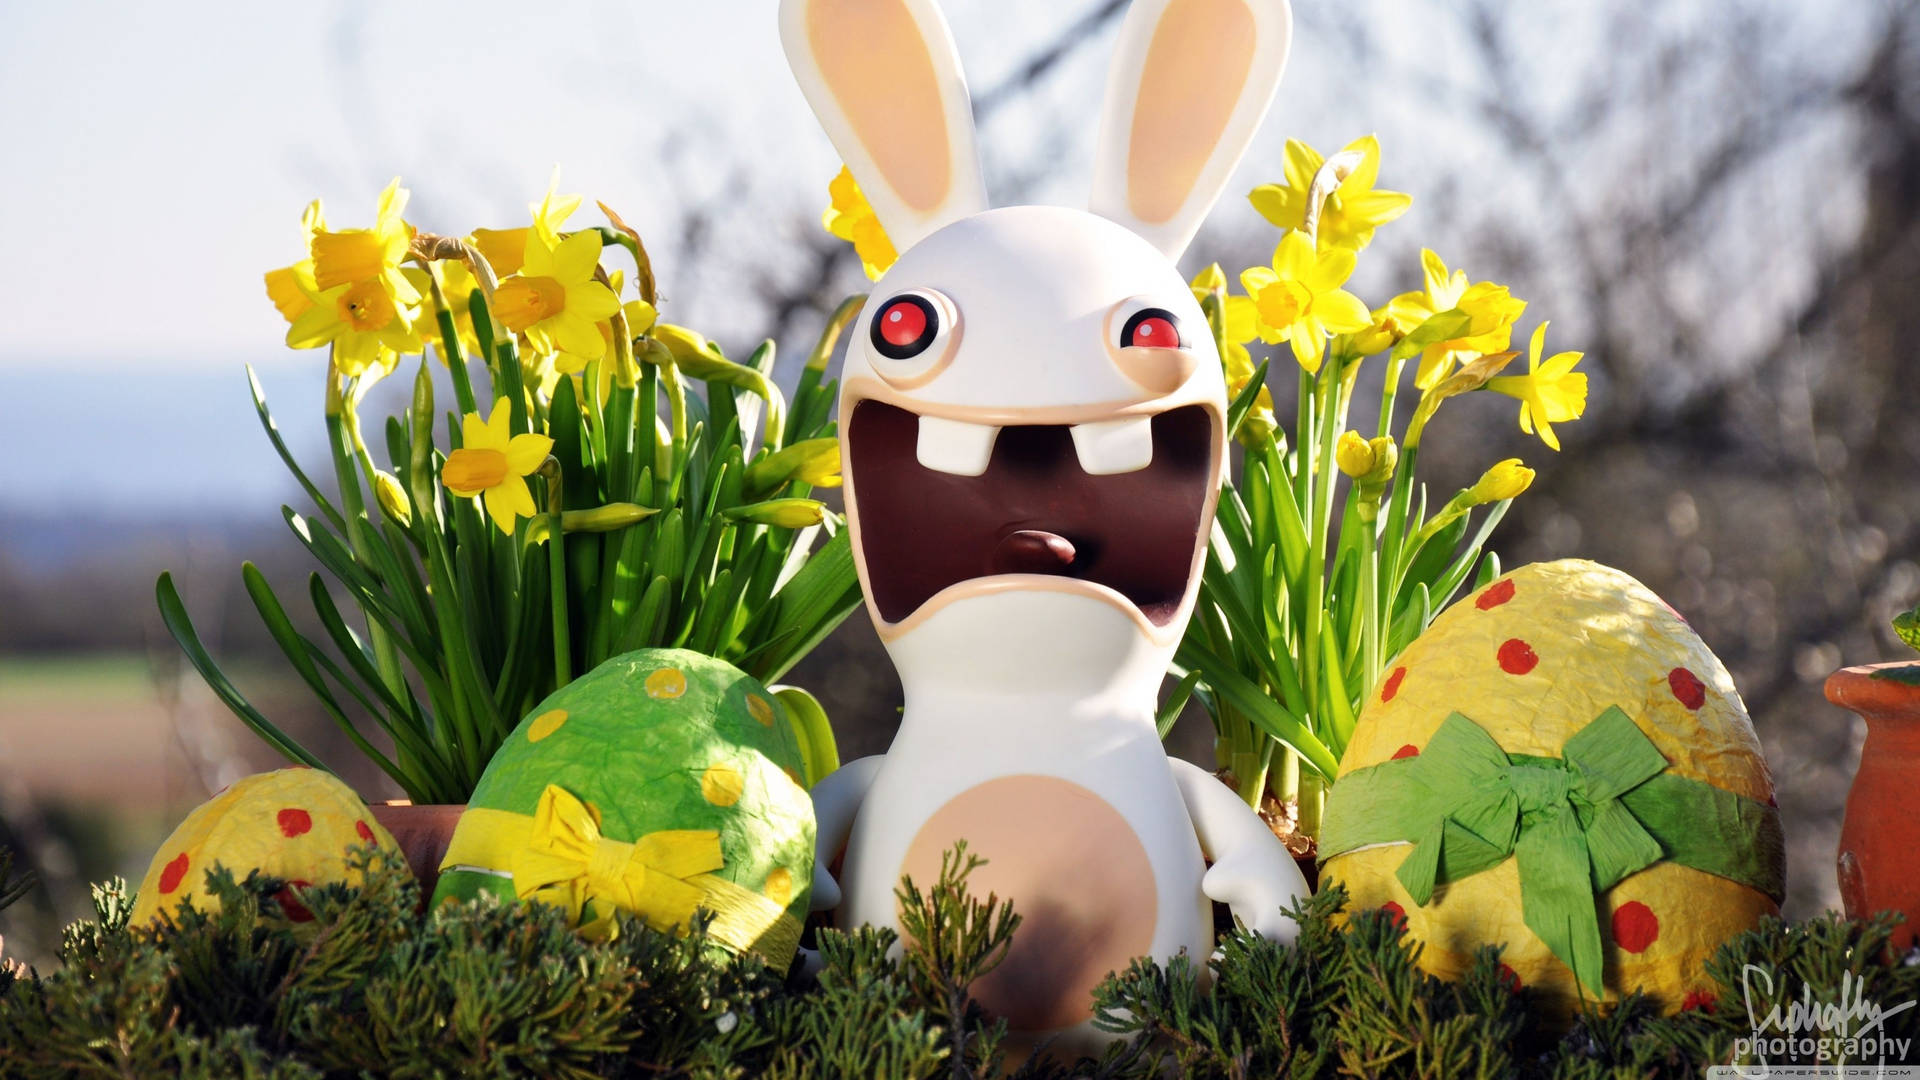 300+] Easter Wallpapers 